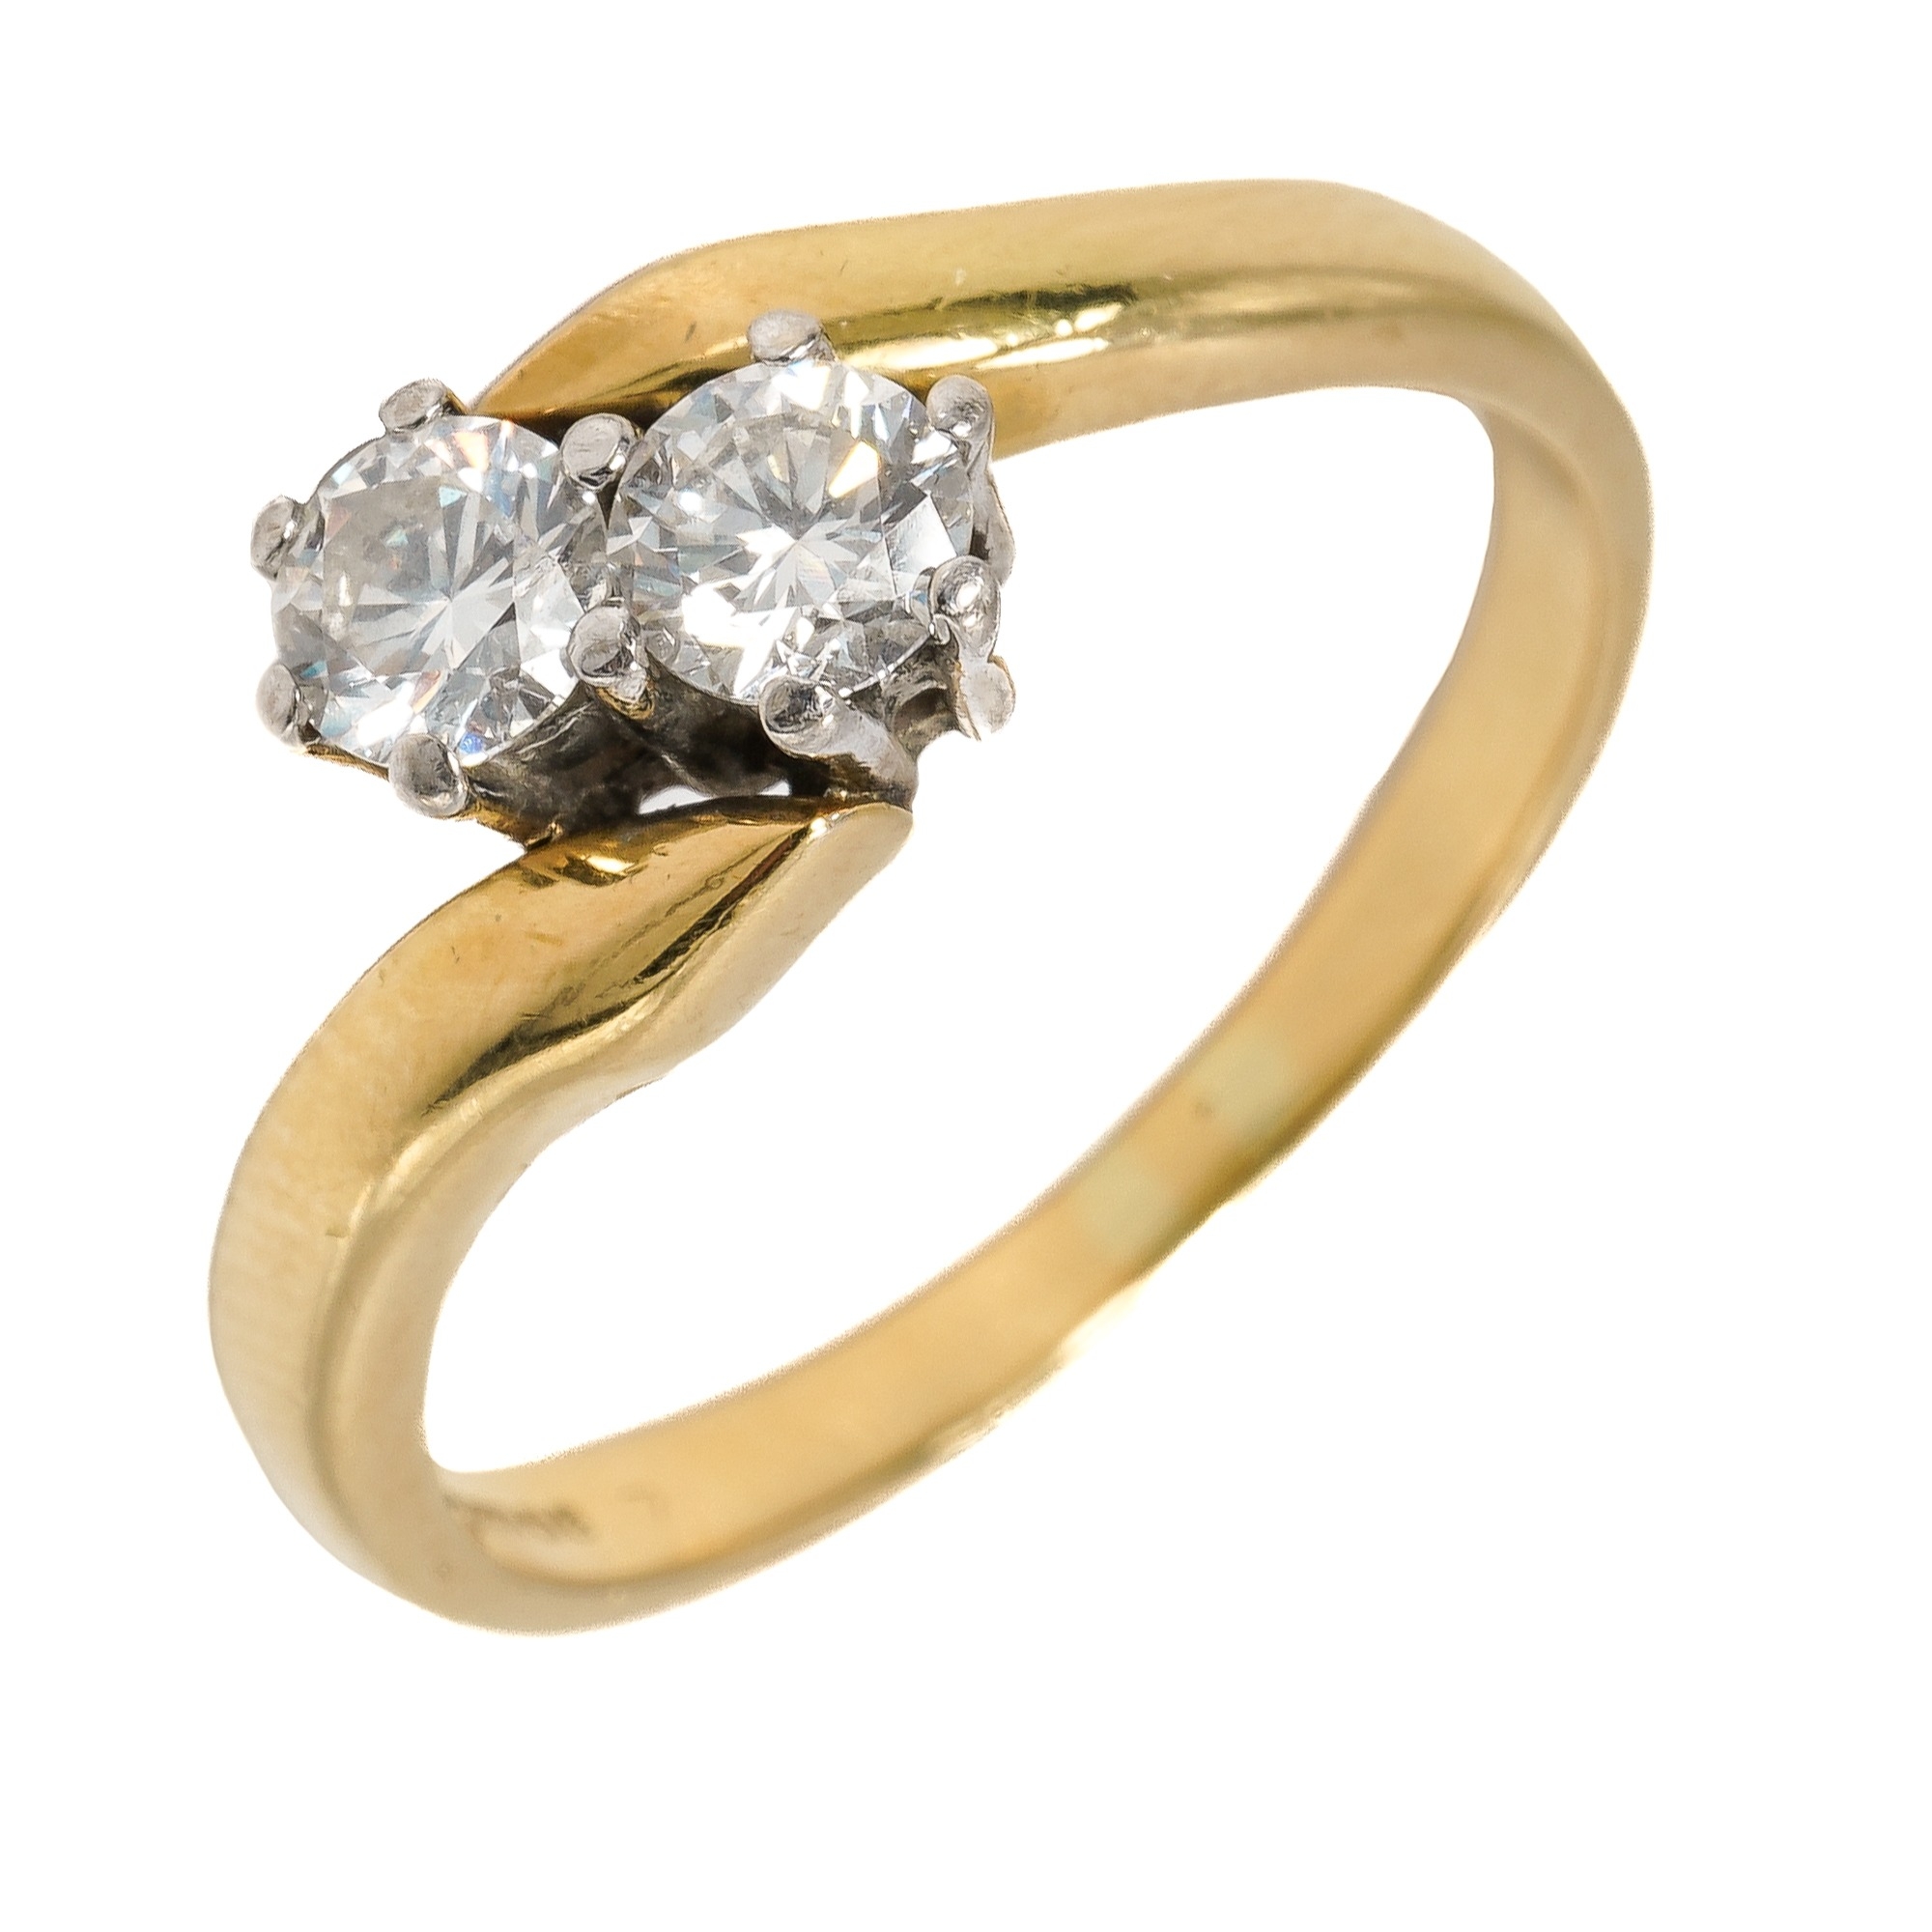 An 18ct yellow gold and diamond two stone crossover ring, set with round brilliant cut diamonds,